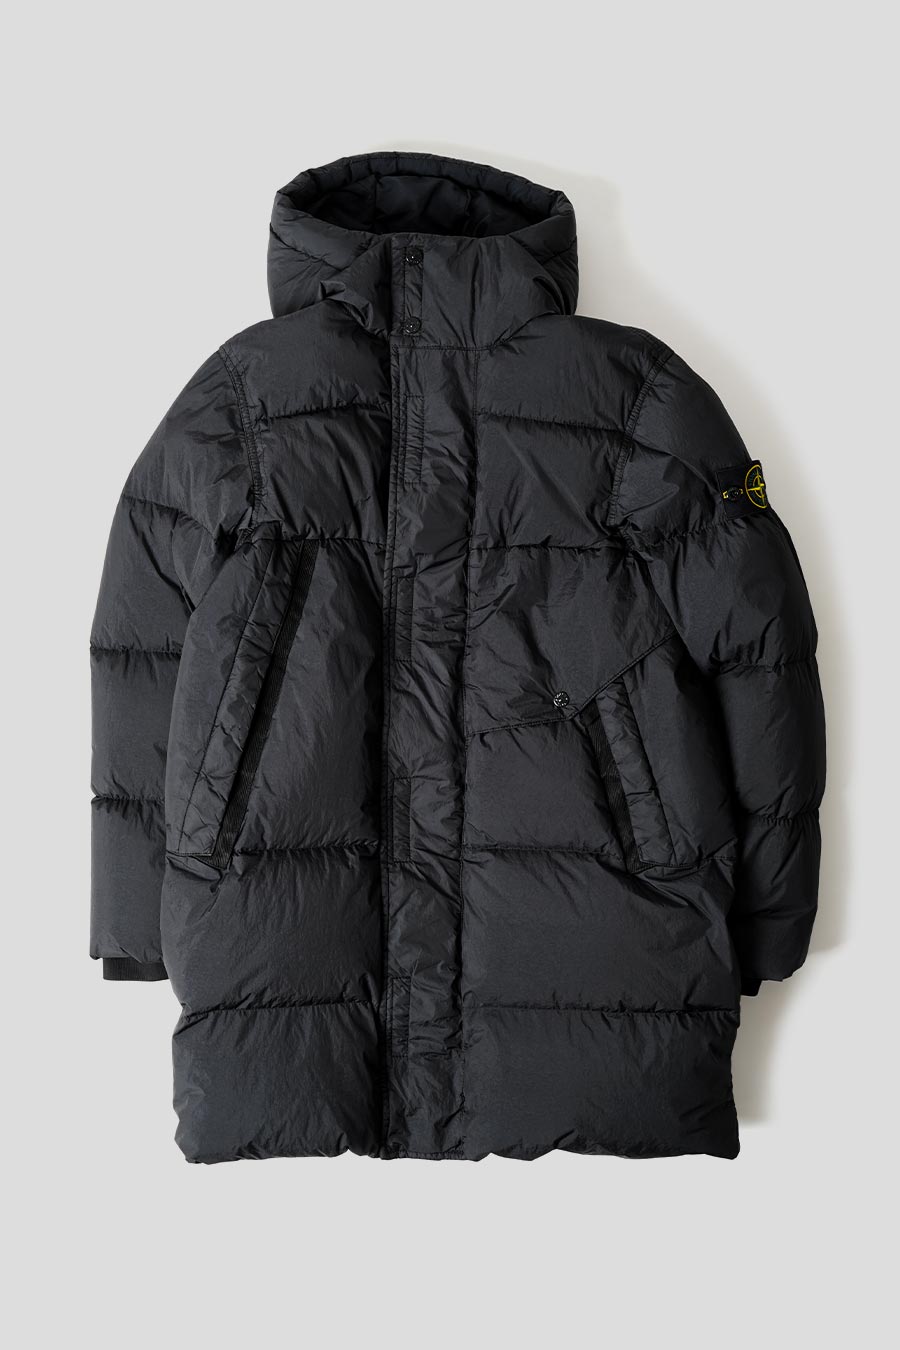 Stone Island - PARKA GARMENT DYED CRINKLE REPS RECYCLED NYLON DOWN NOIRE - LE LABO STORE